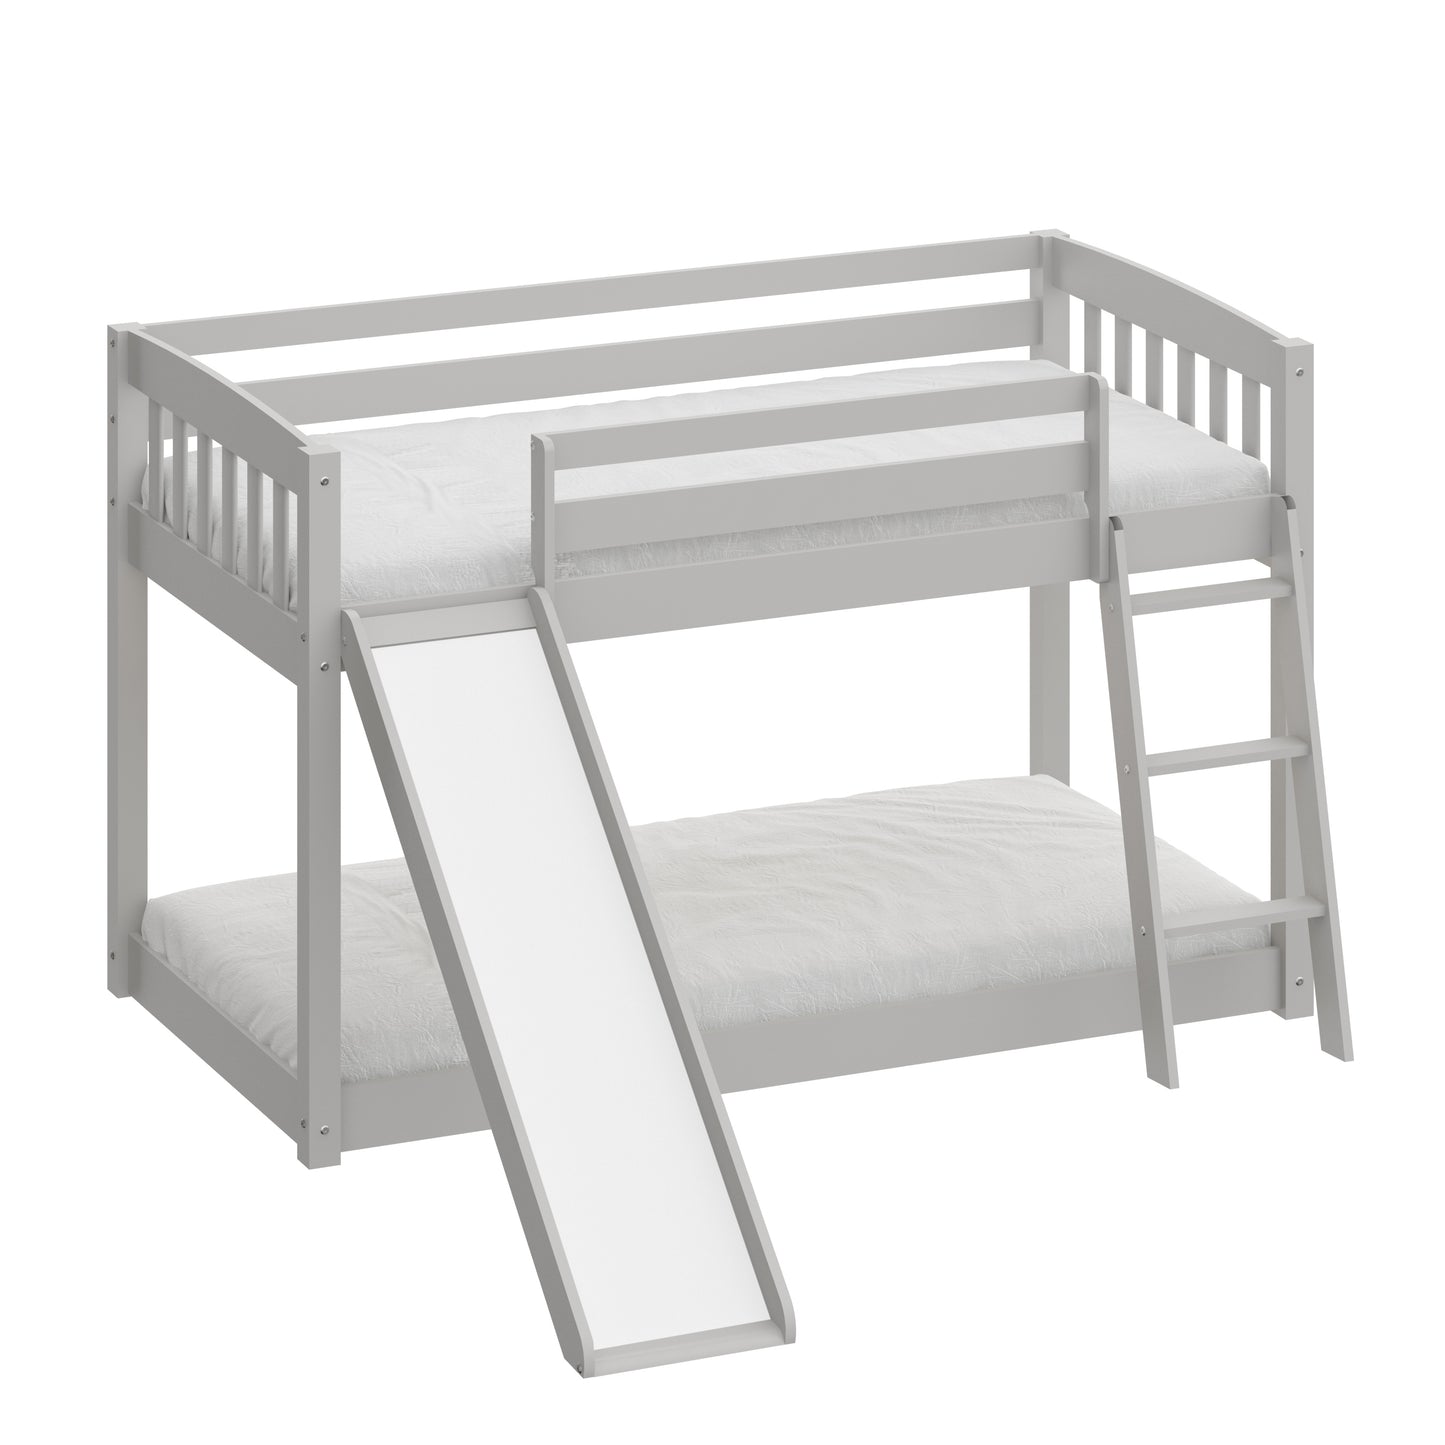 Yes4wood Kids Bunk Bed Twin Over Twin with Slide & Ladder, Heavy Duty Solid Wood Twin Bunk Beds Frame with Safety Guardrails for Toddlers, Gray